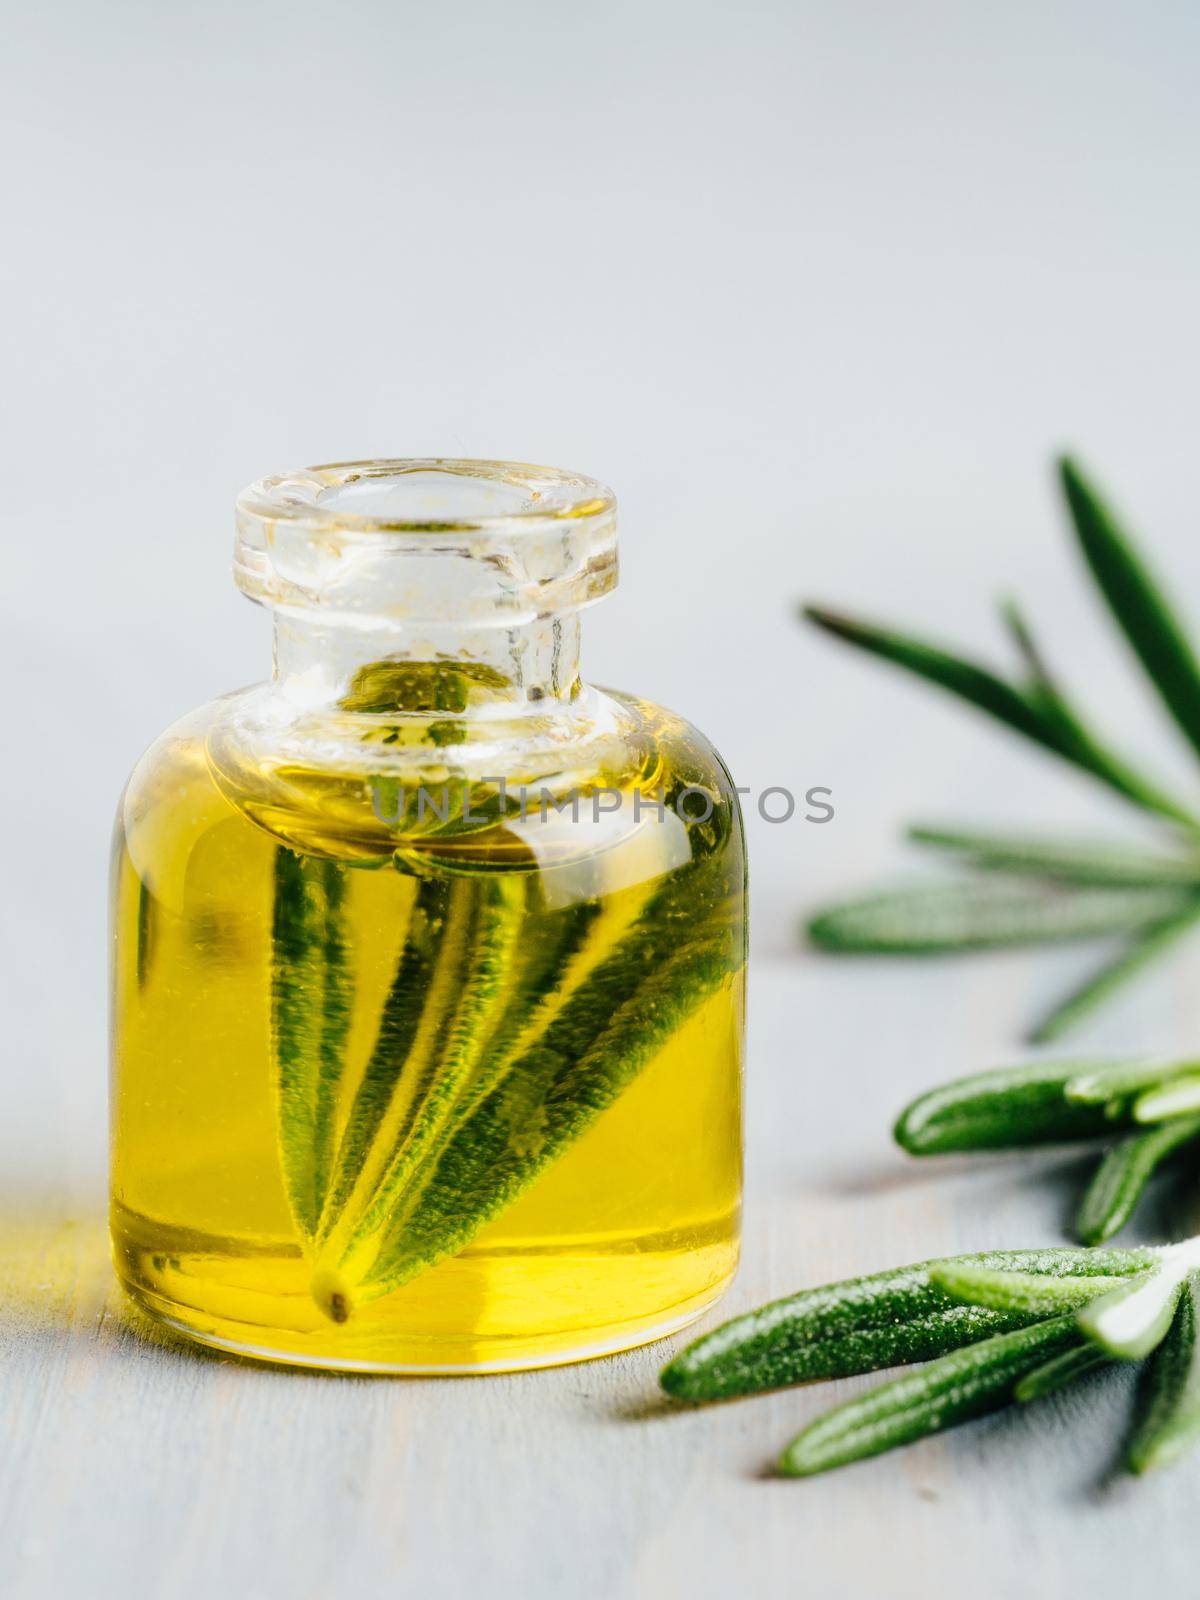 Rosemary essential oil in small glass bottle fresh rosemary by fascinadora